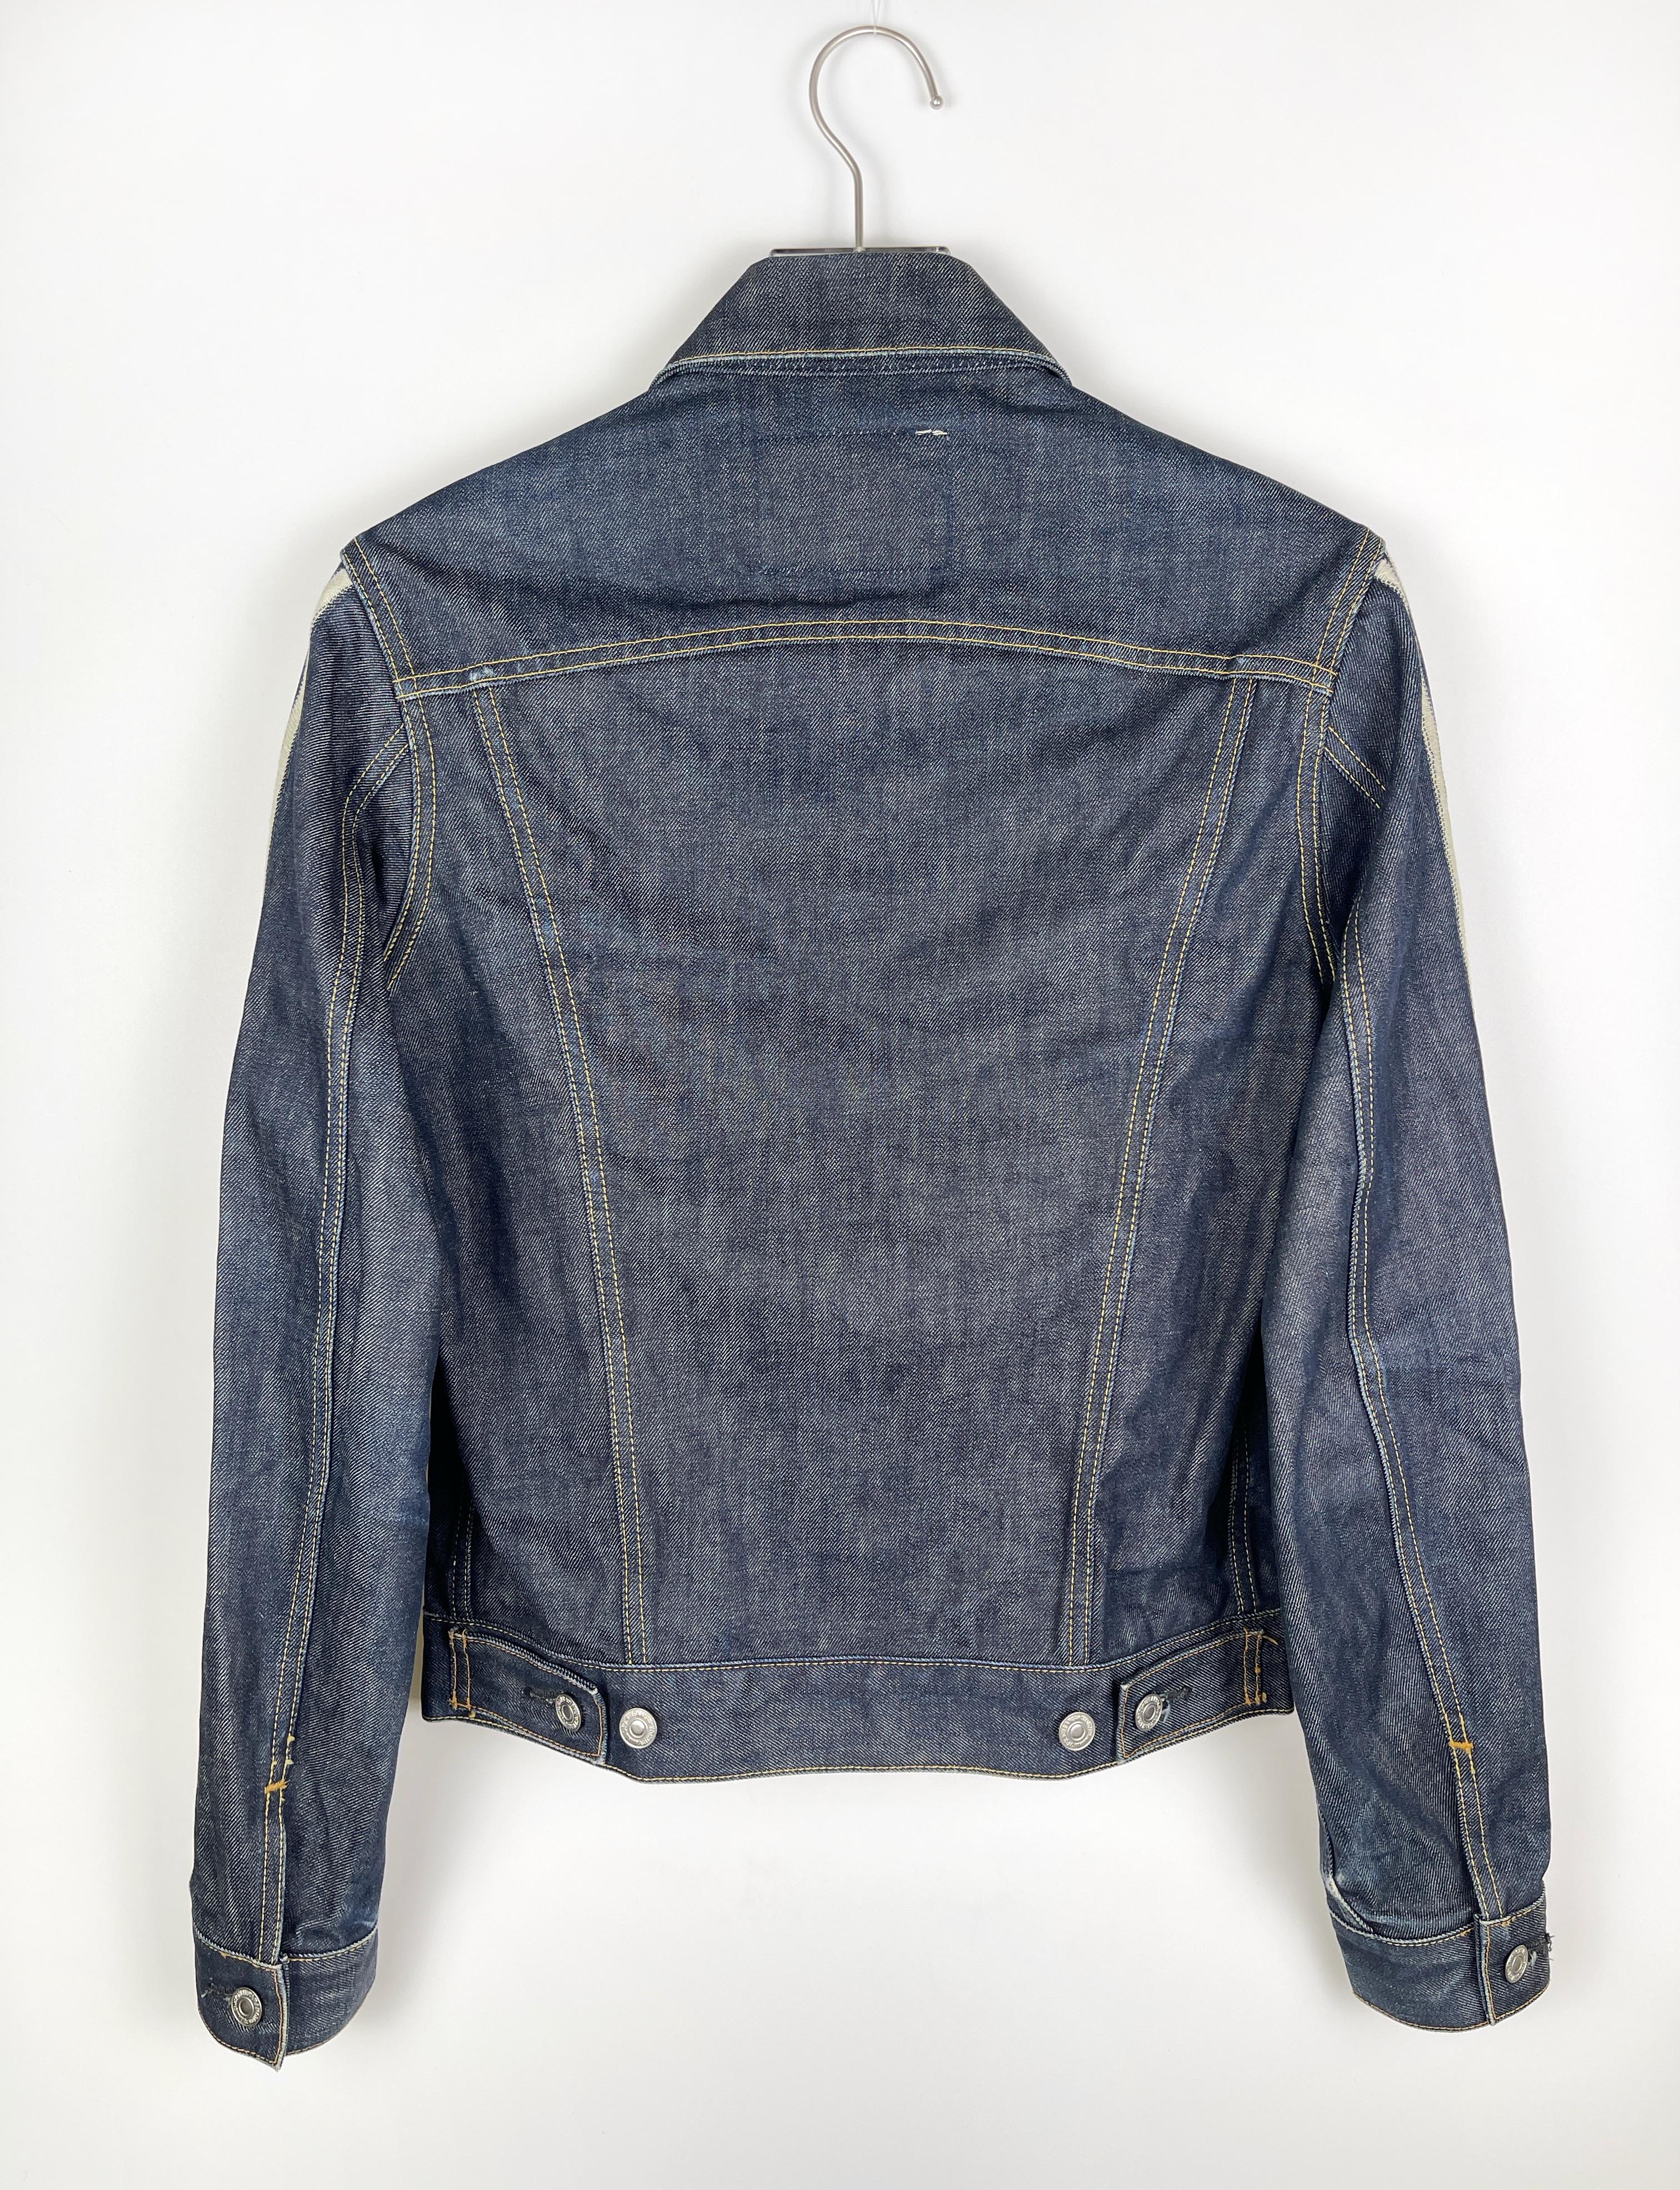 Yohji Yamamoto Y-3 S/S2004 Striped Denim Jacket In Excellent Condition For Sale In Seattle, WA